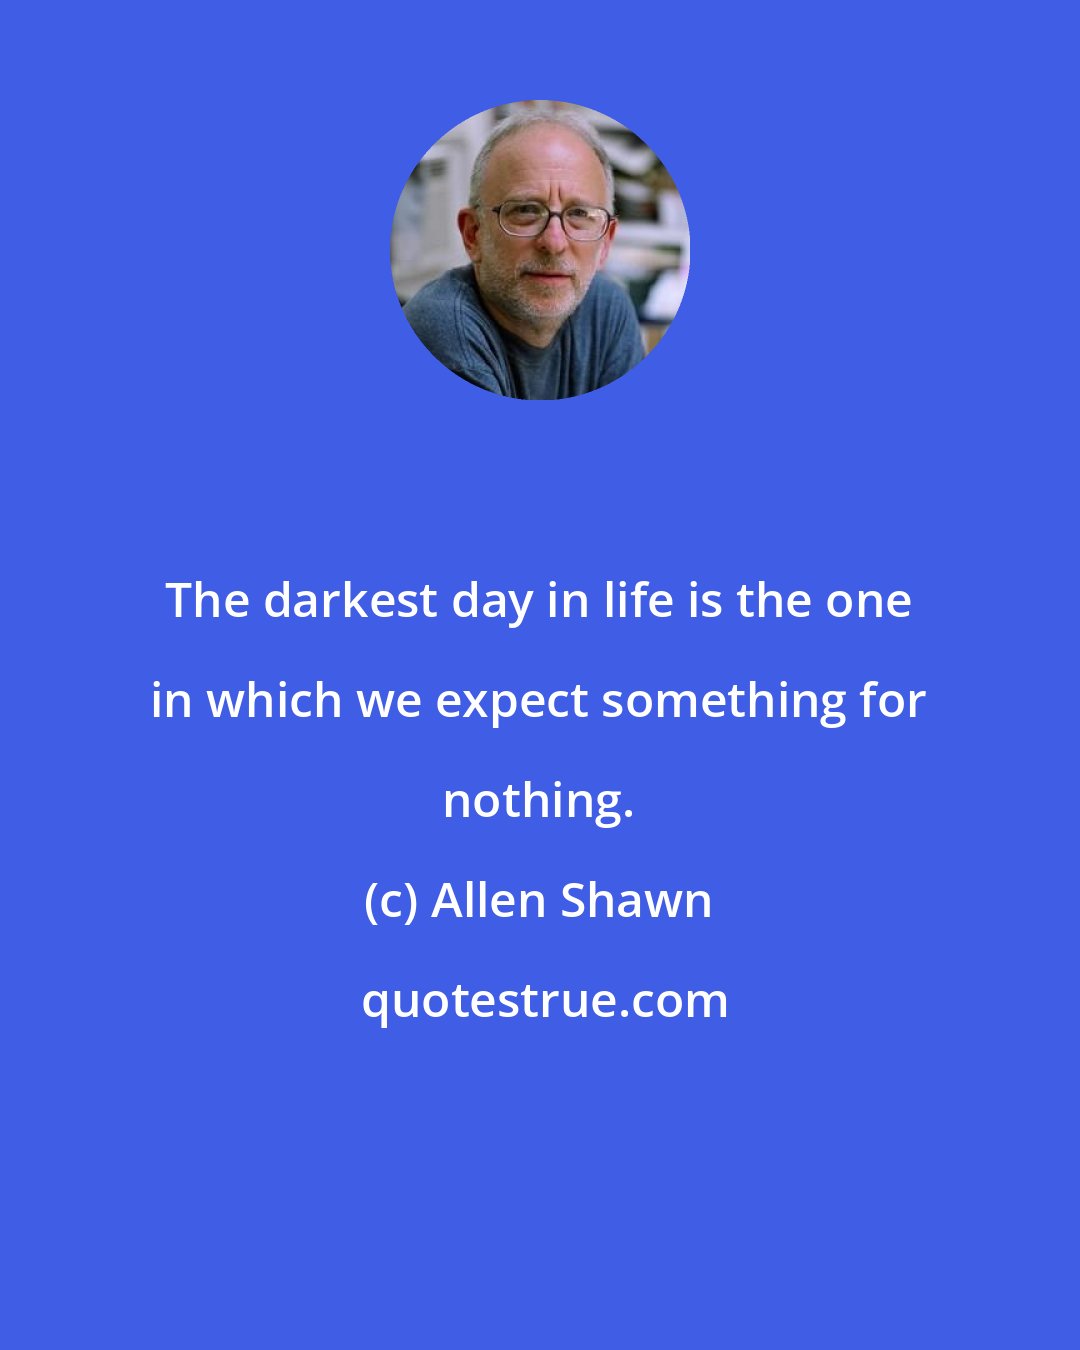 Allen Shawn: The darkest day in life is the one in which we expect something for nothing.